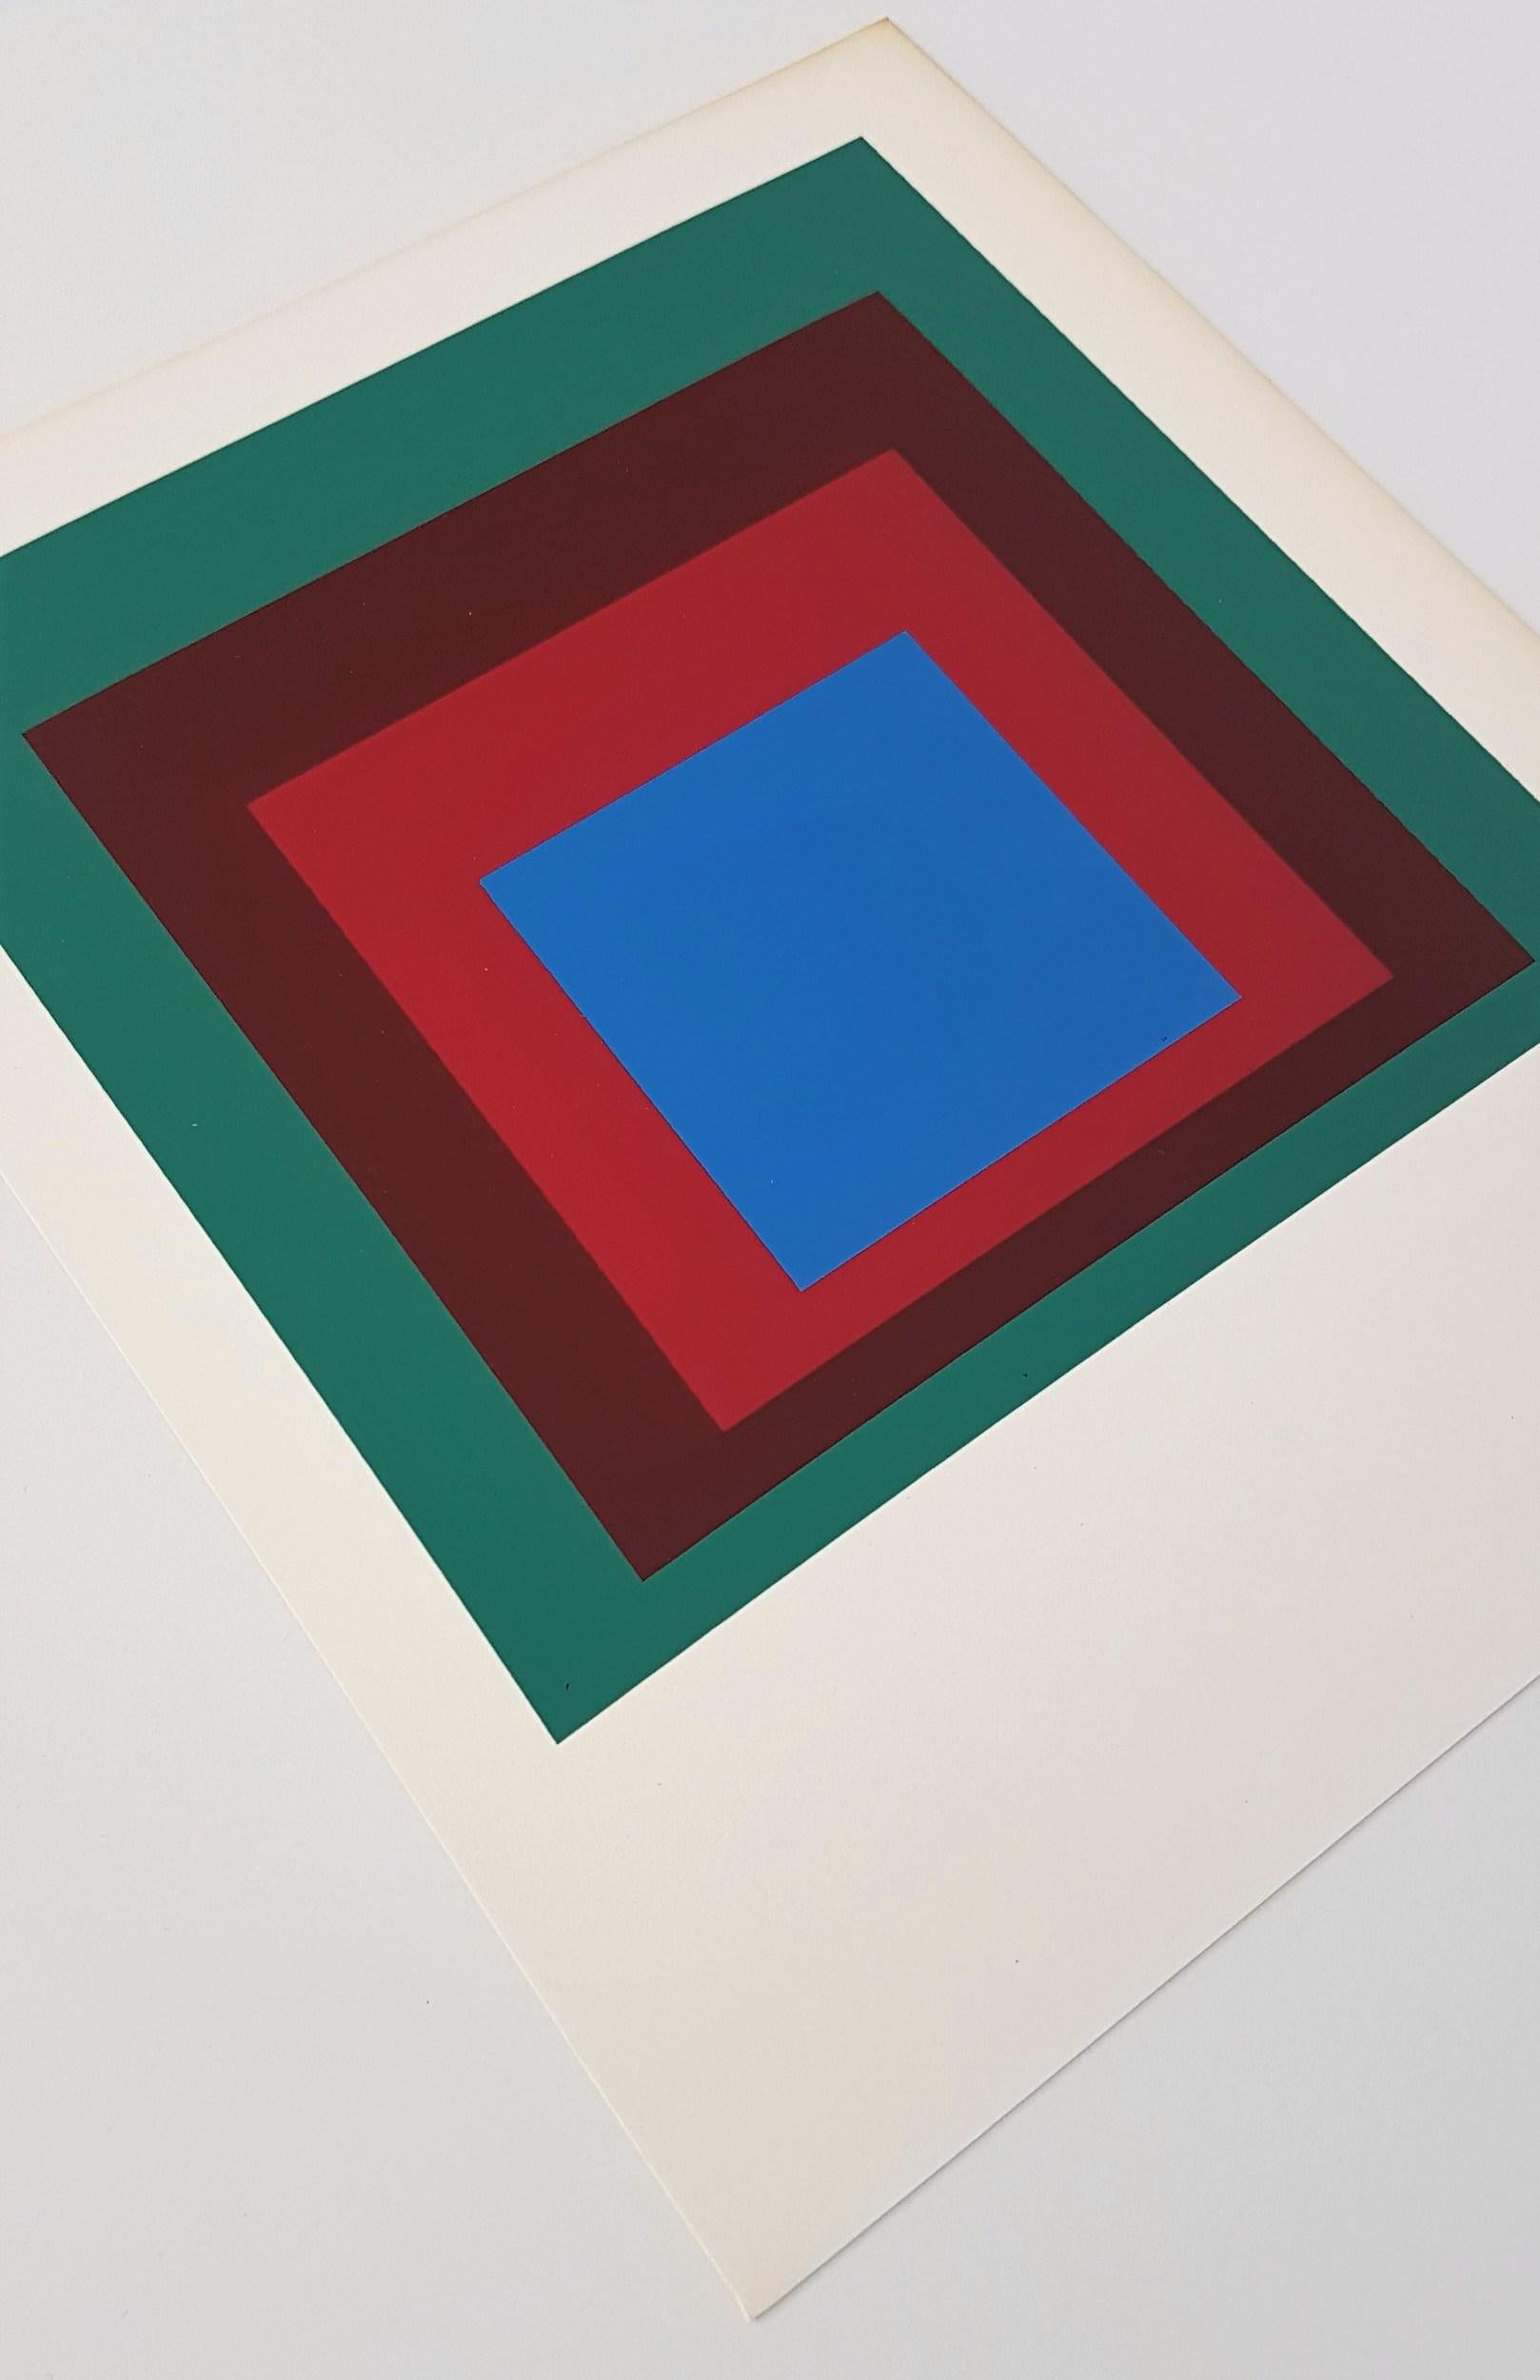 Josef Albers
Homage to the Square: Protected Blue (from 